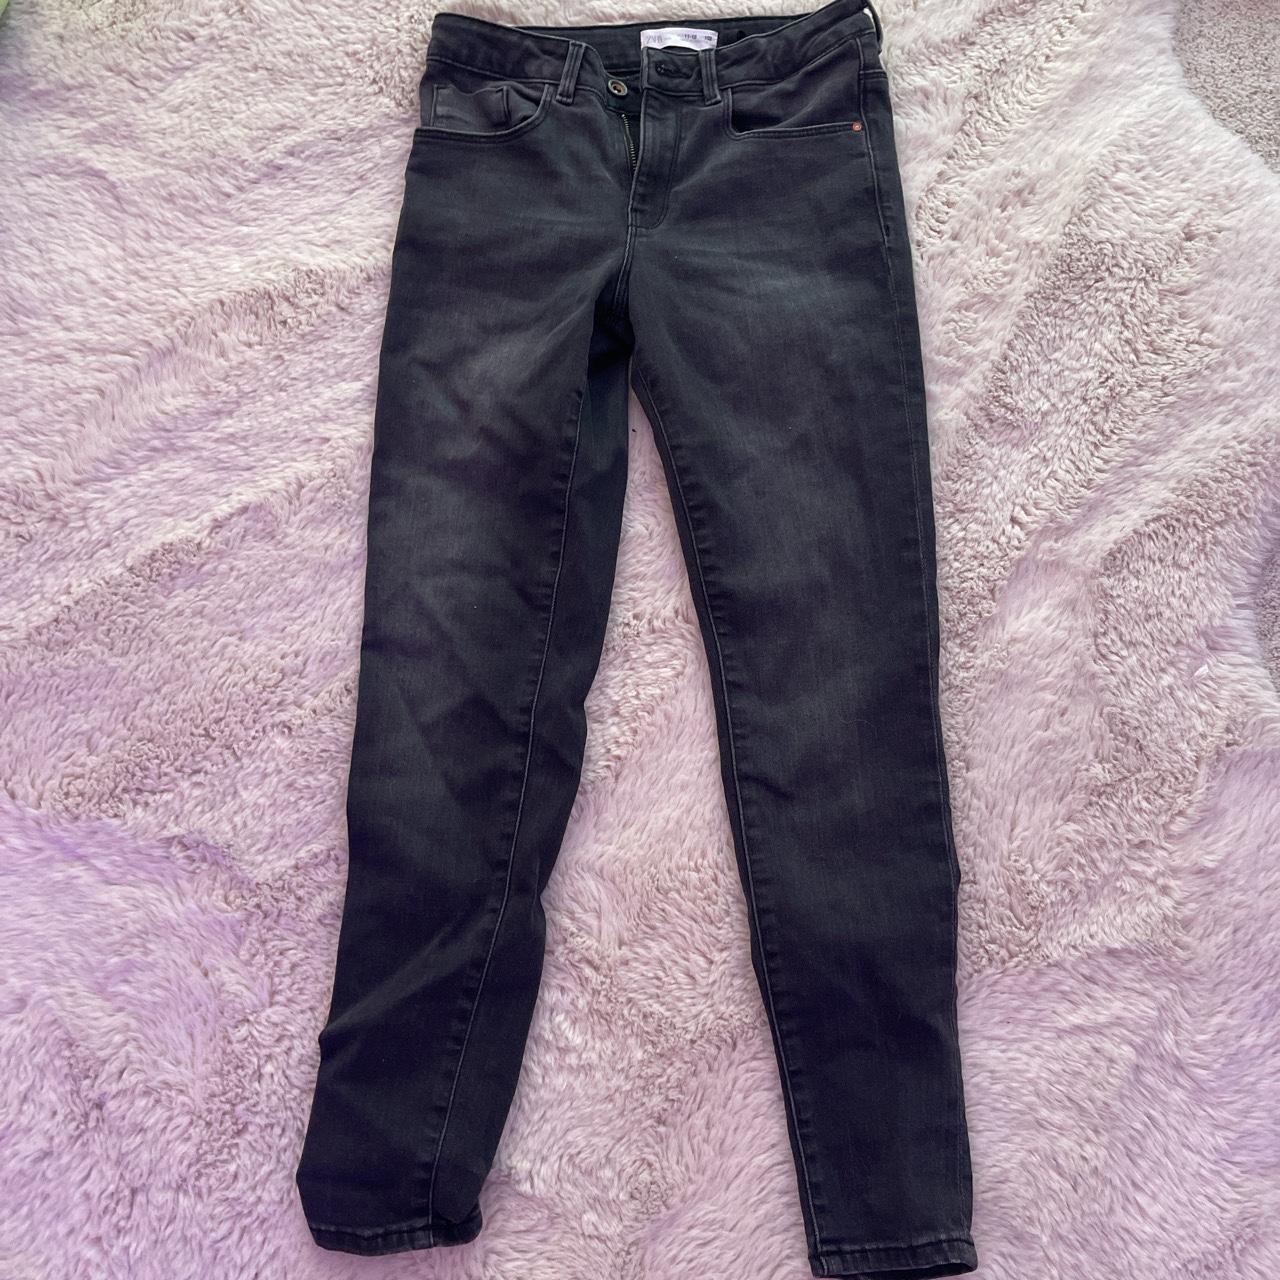 super small pare of black jeans never worn - Depop